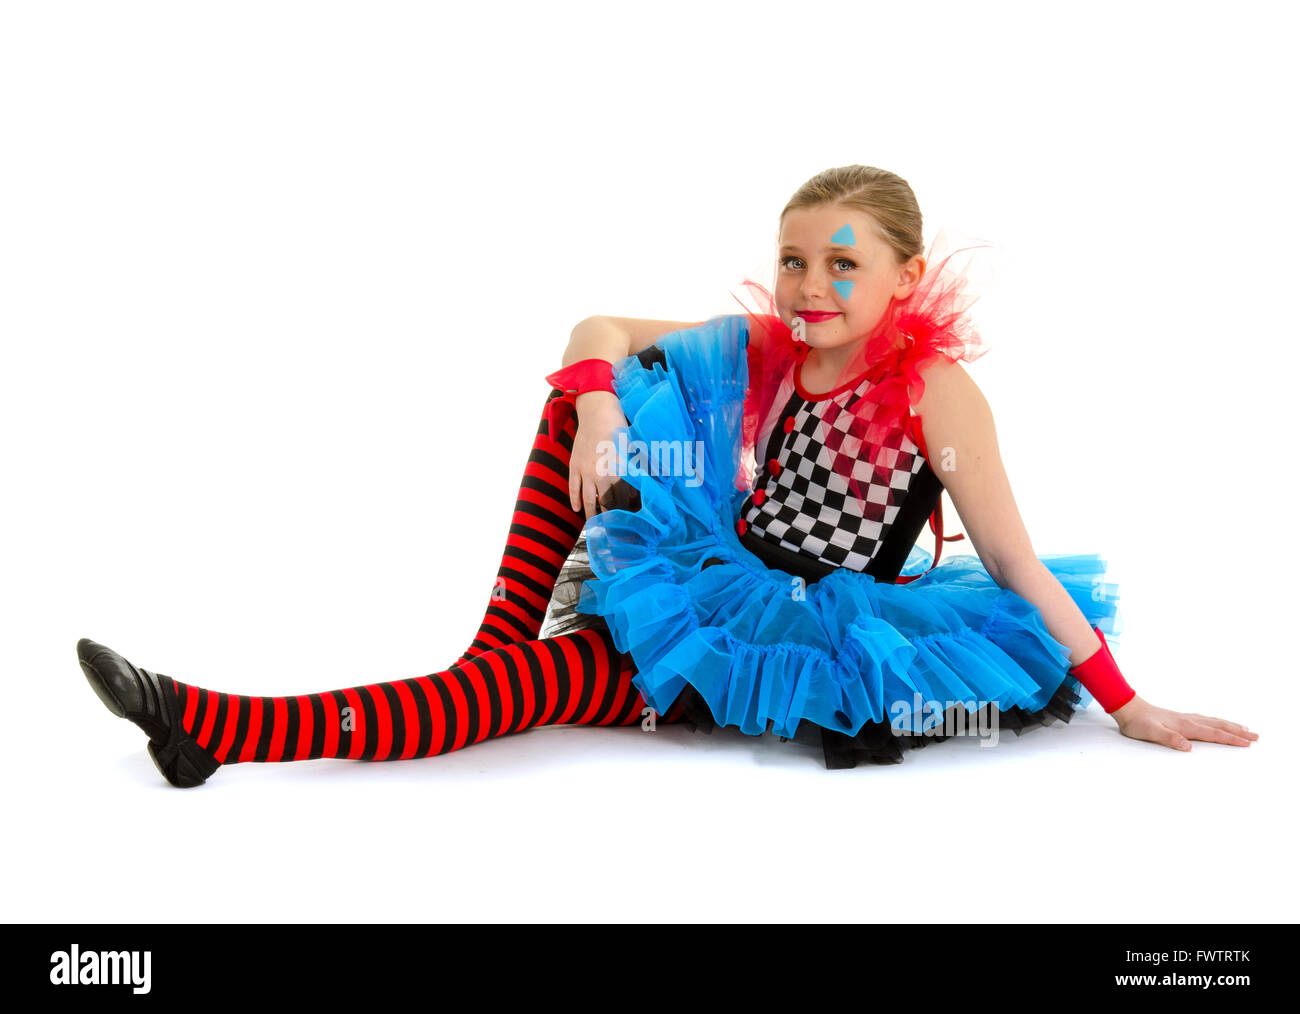 Flamboyant Costume High Resolution Stock Photography and Images - Alamy